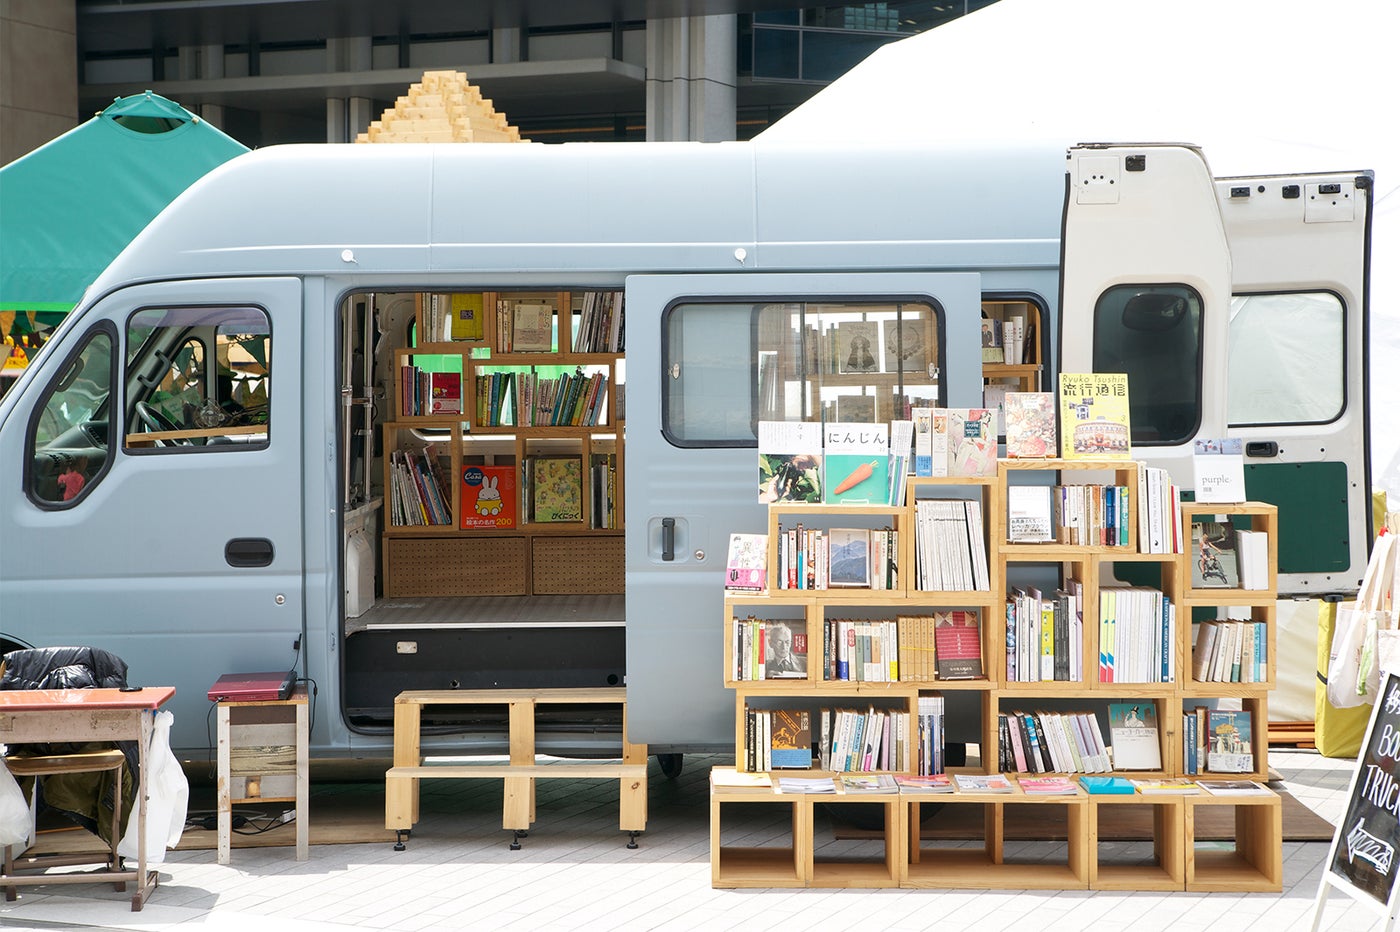 BOOK TRUCK1／画像提供：横浜赤レンガ倉庫